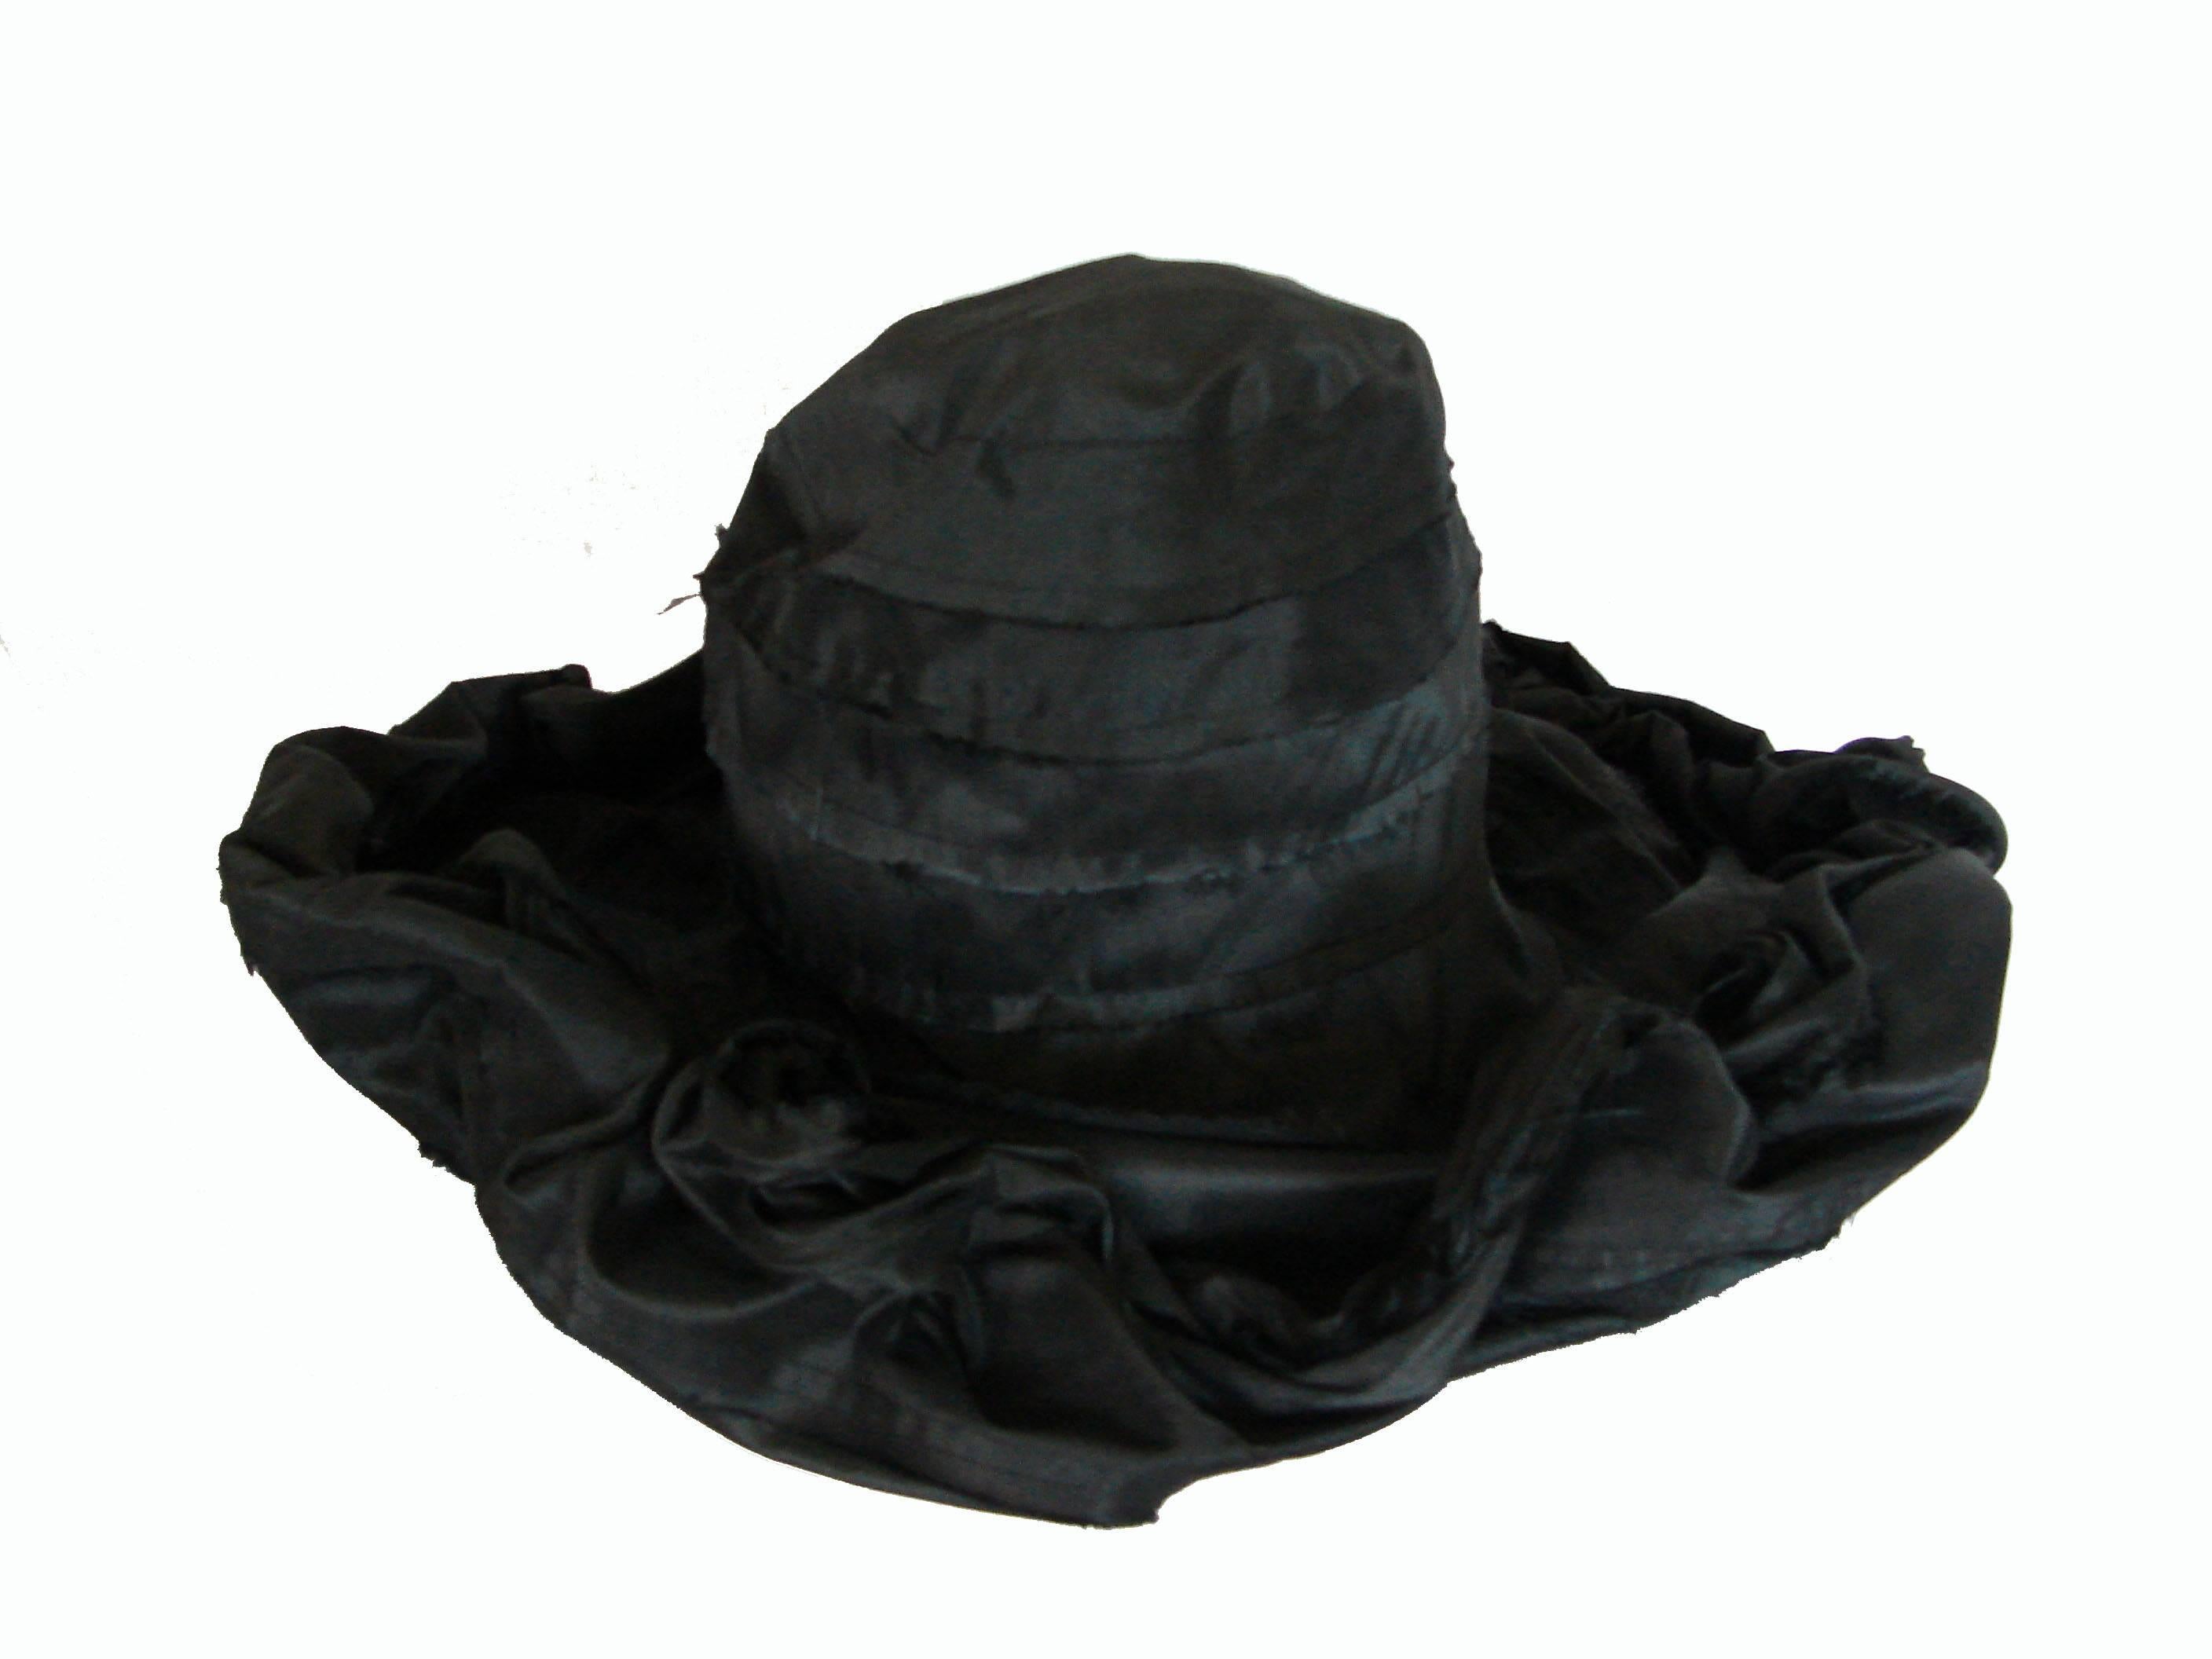 An extremely rare hat from Ivan Grundahl Copenhagen.  Made from silk taffeta, the brim features a bendable wire frame so that one can adjust and style the hat in a variety of ways.  New with tags and in perfect condition.  One size fits most.
